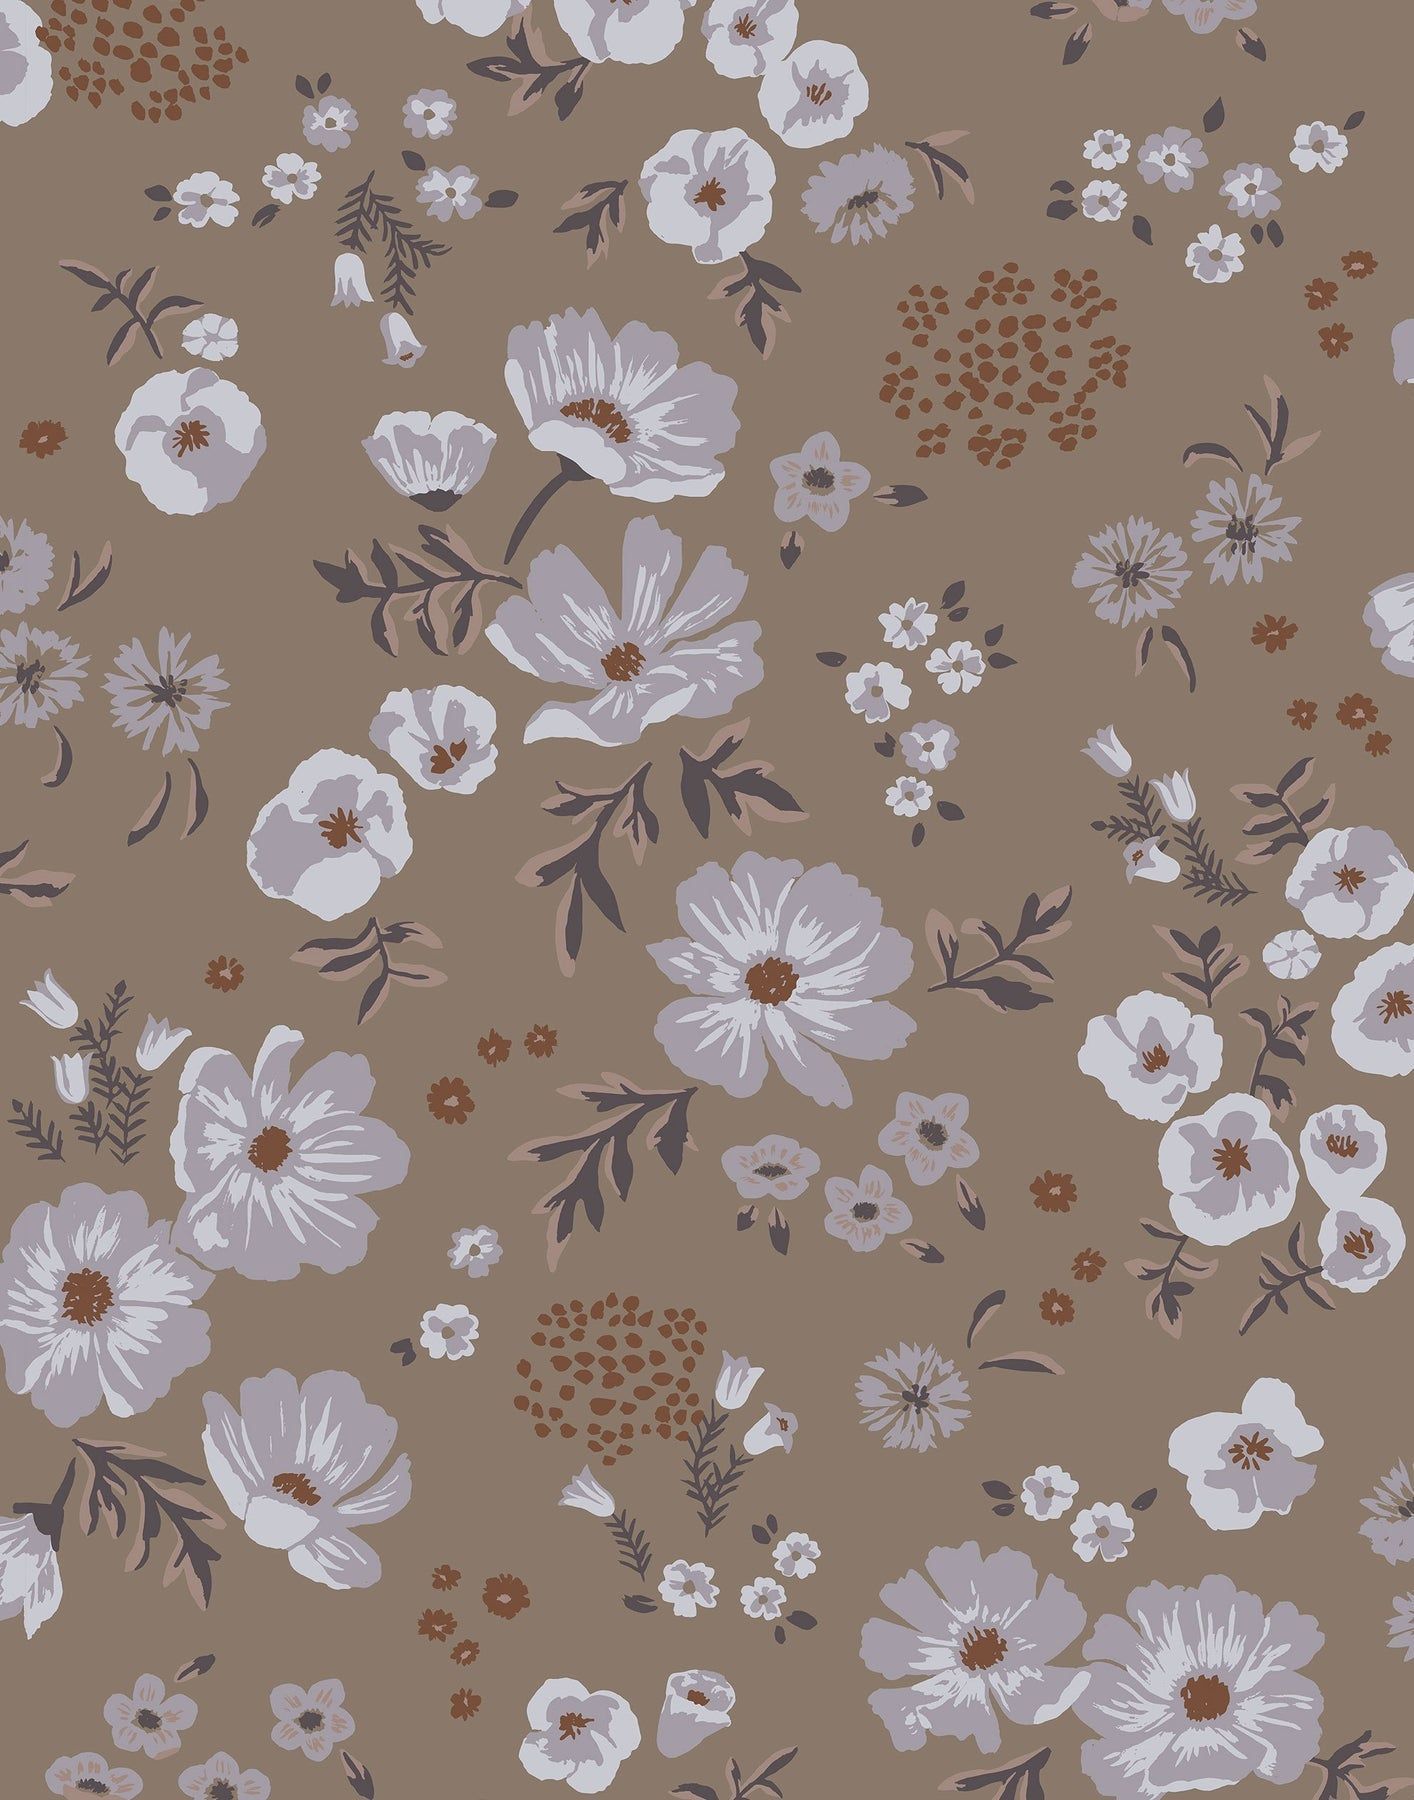 A beautiful floral pattern on a brown background - Terracotta, western